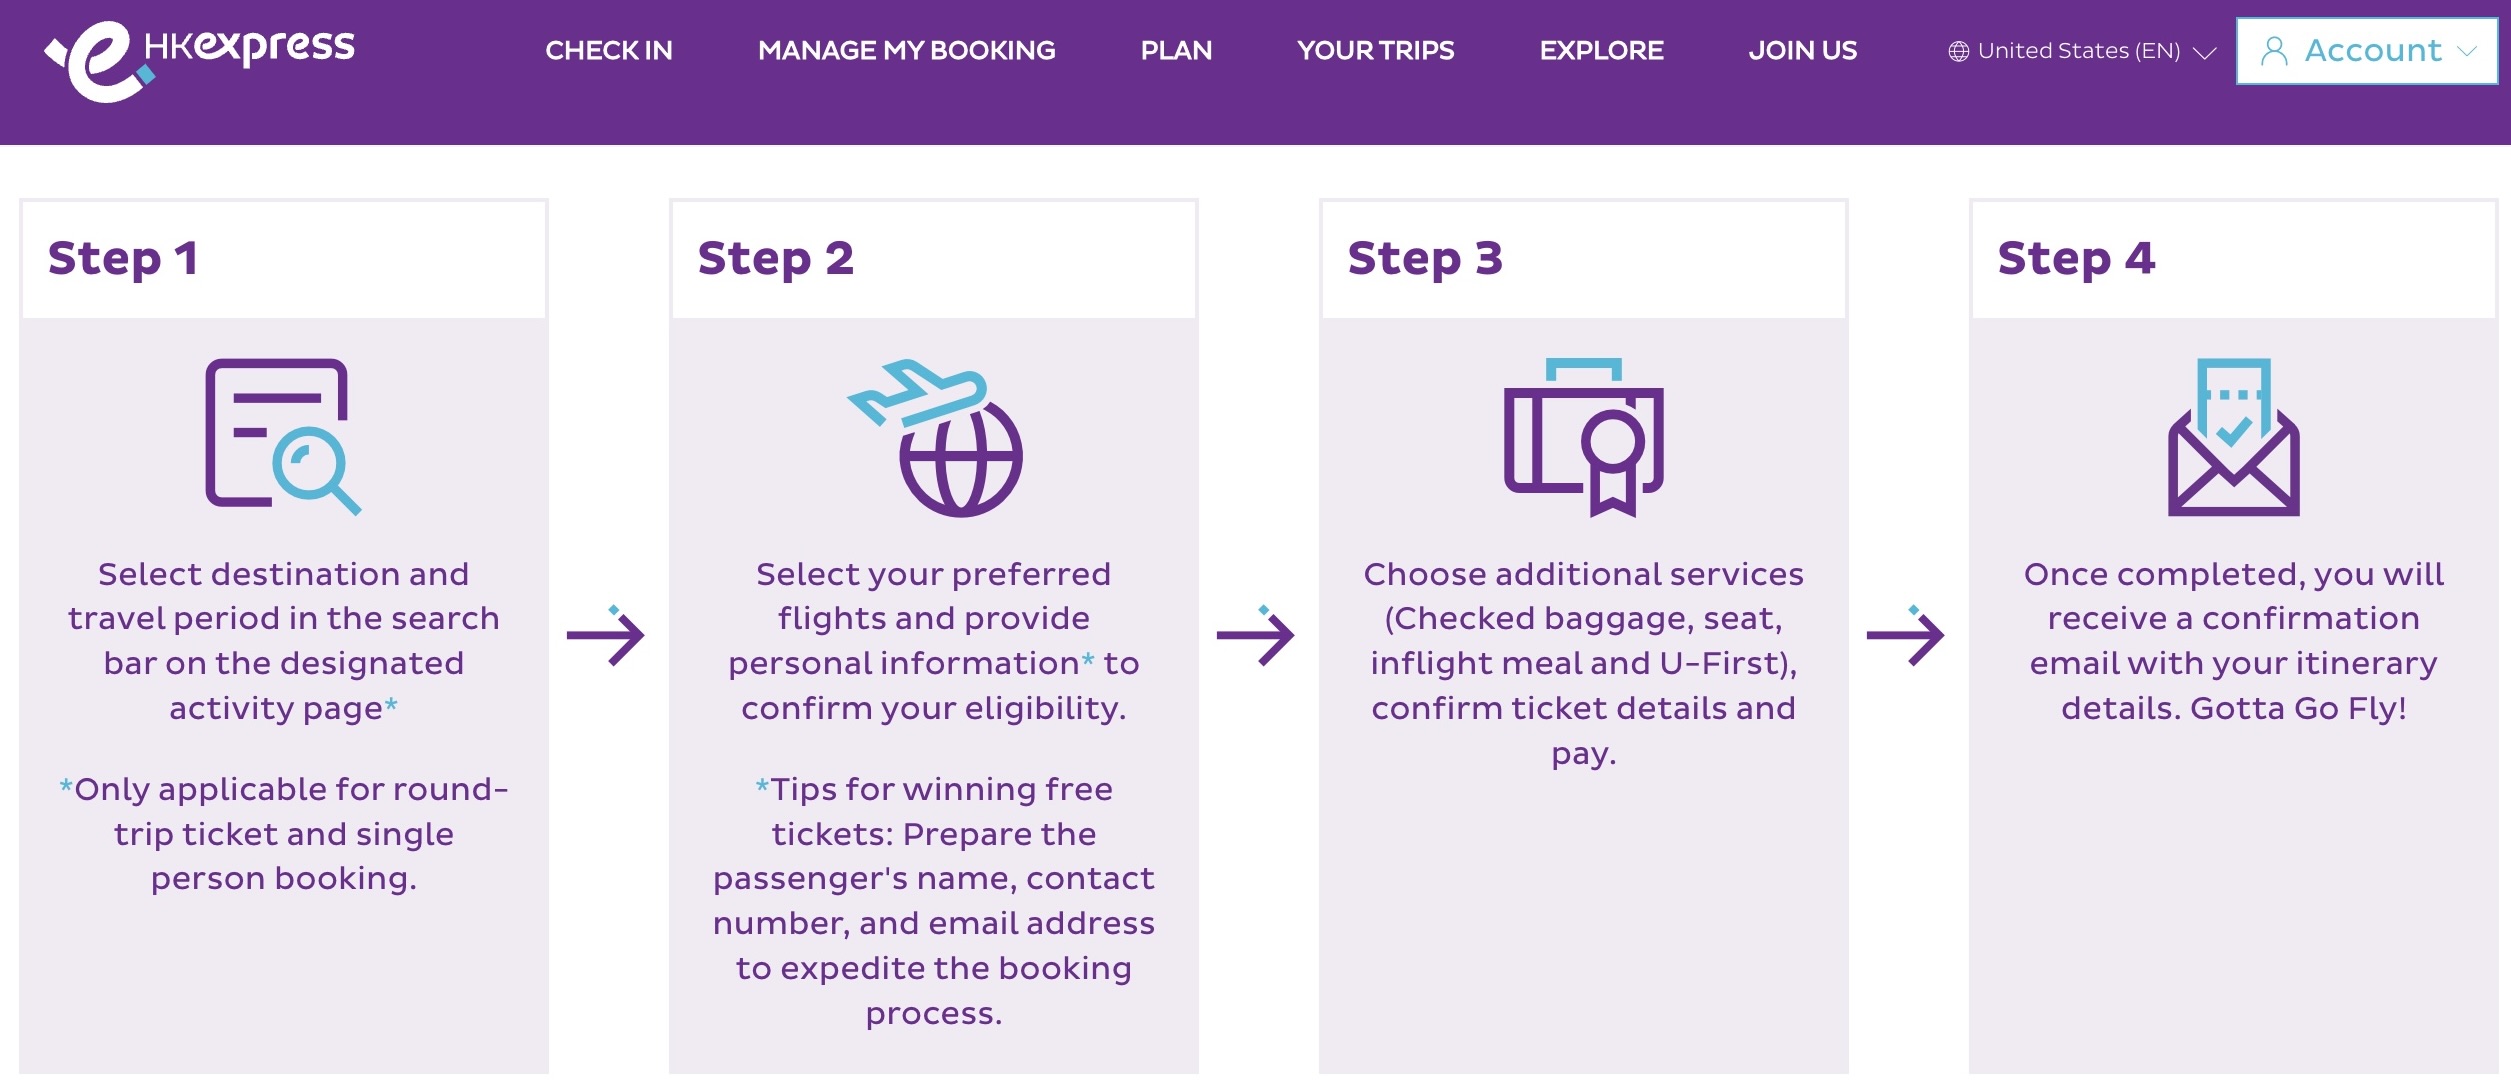 A screenshot from the HK Express website detailing the four steps campaign participants need to follow to book their tickets.